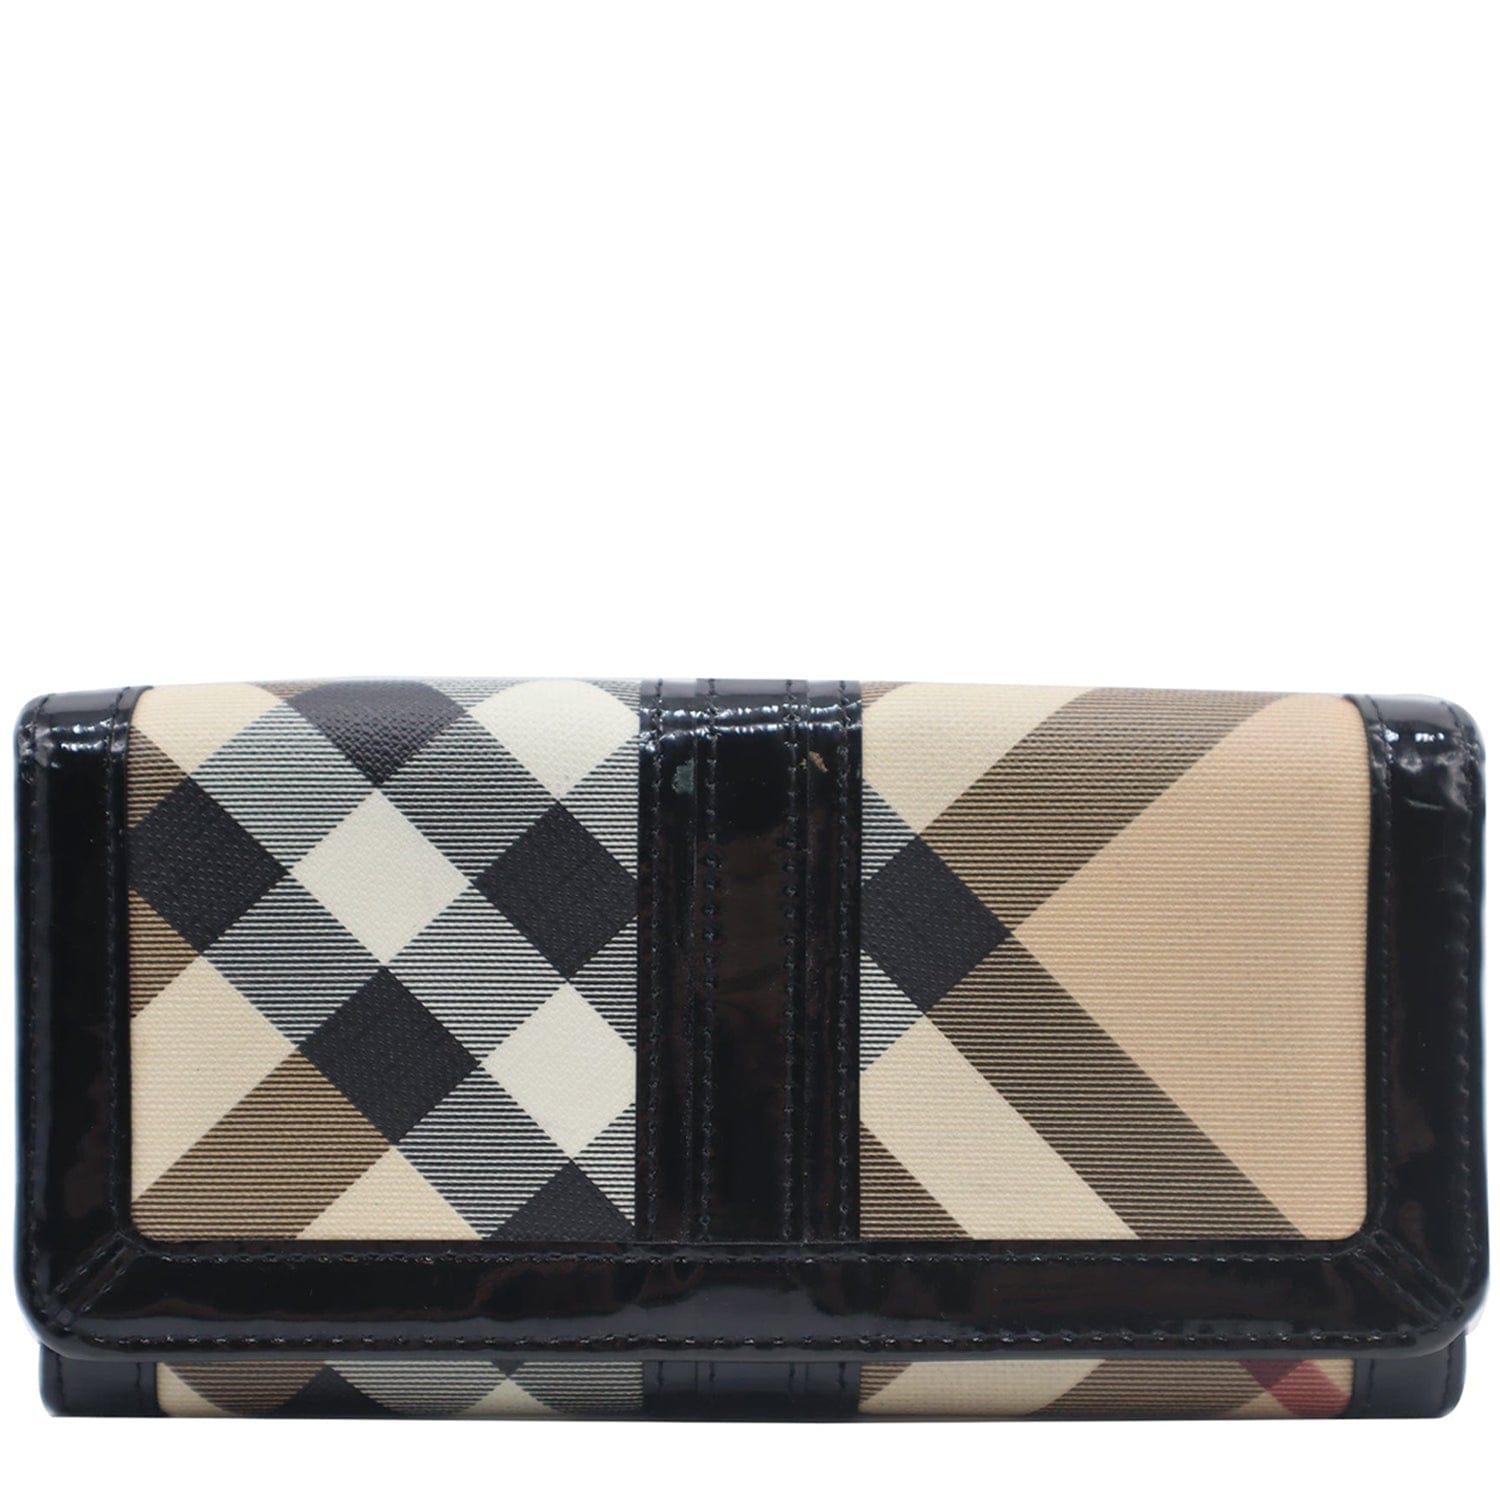 Burberry Black/Beige House Check PVC and Leather Allington Compact Wallet  Burberry